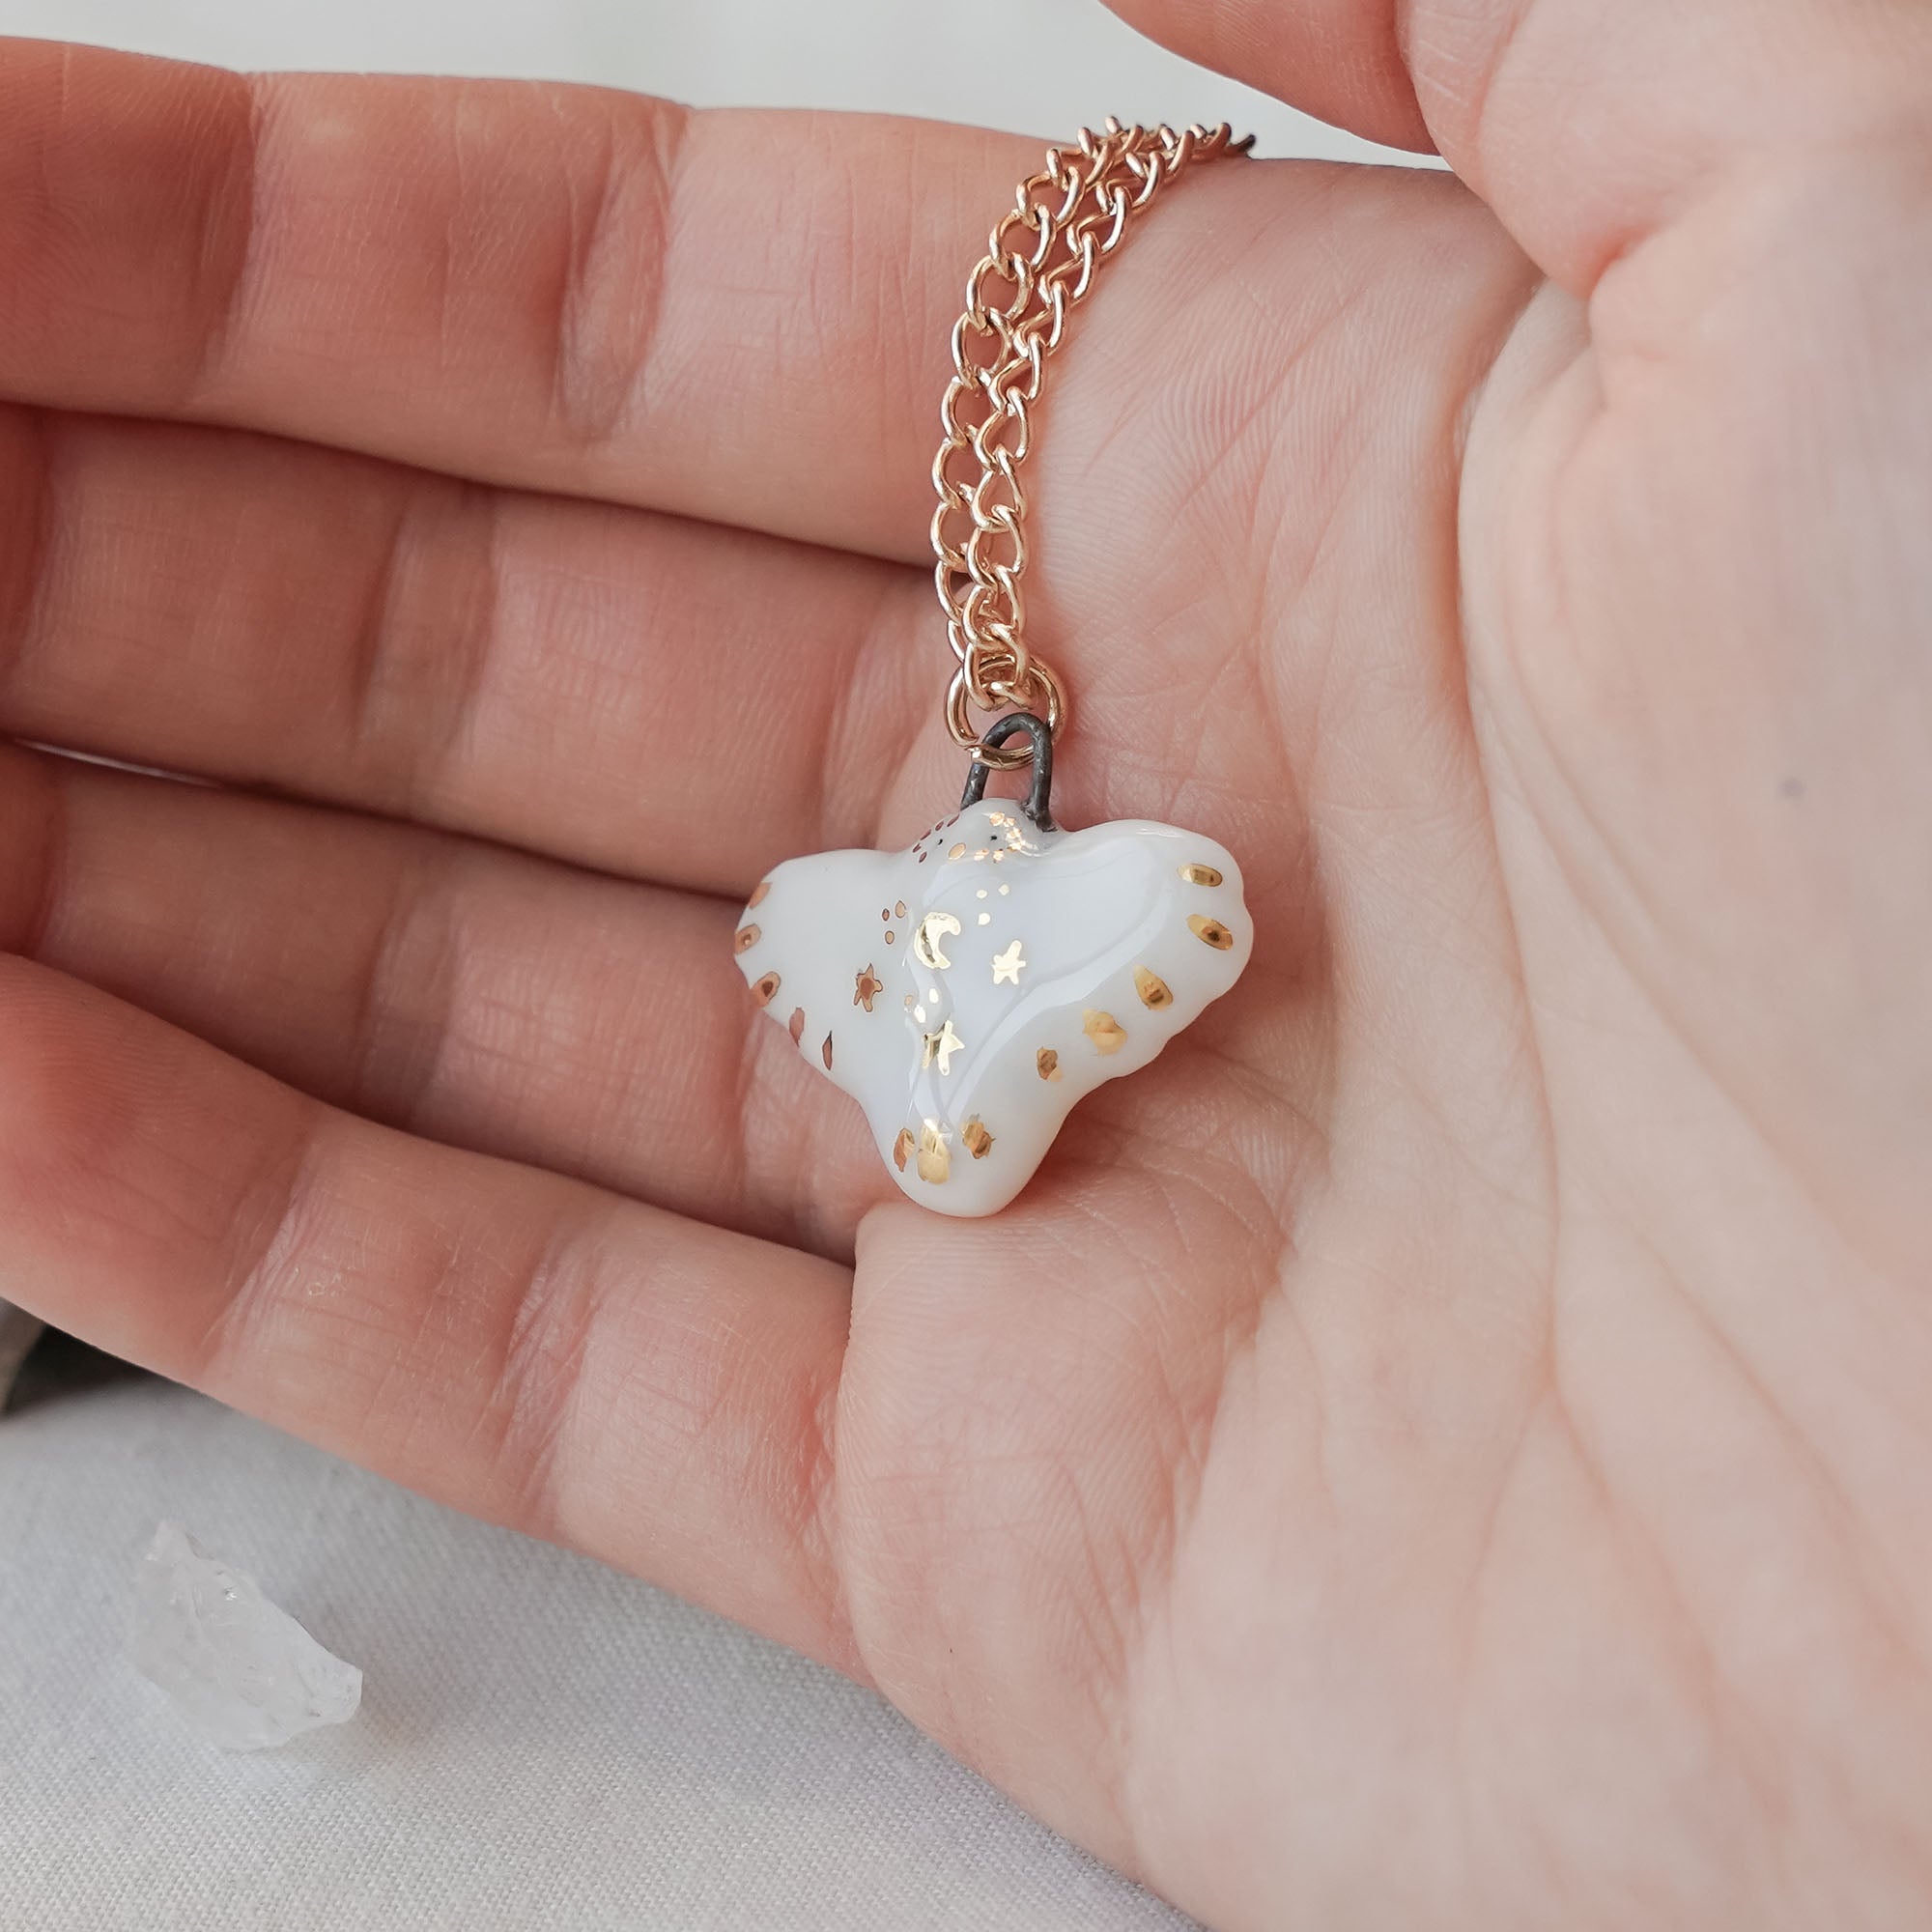 Porcelain owl with the moon and stars pendant